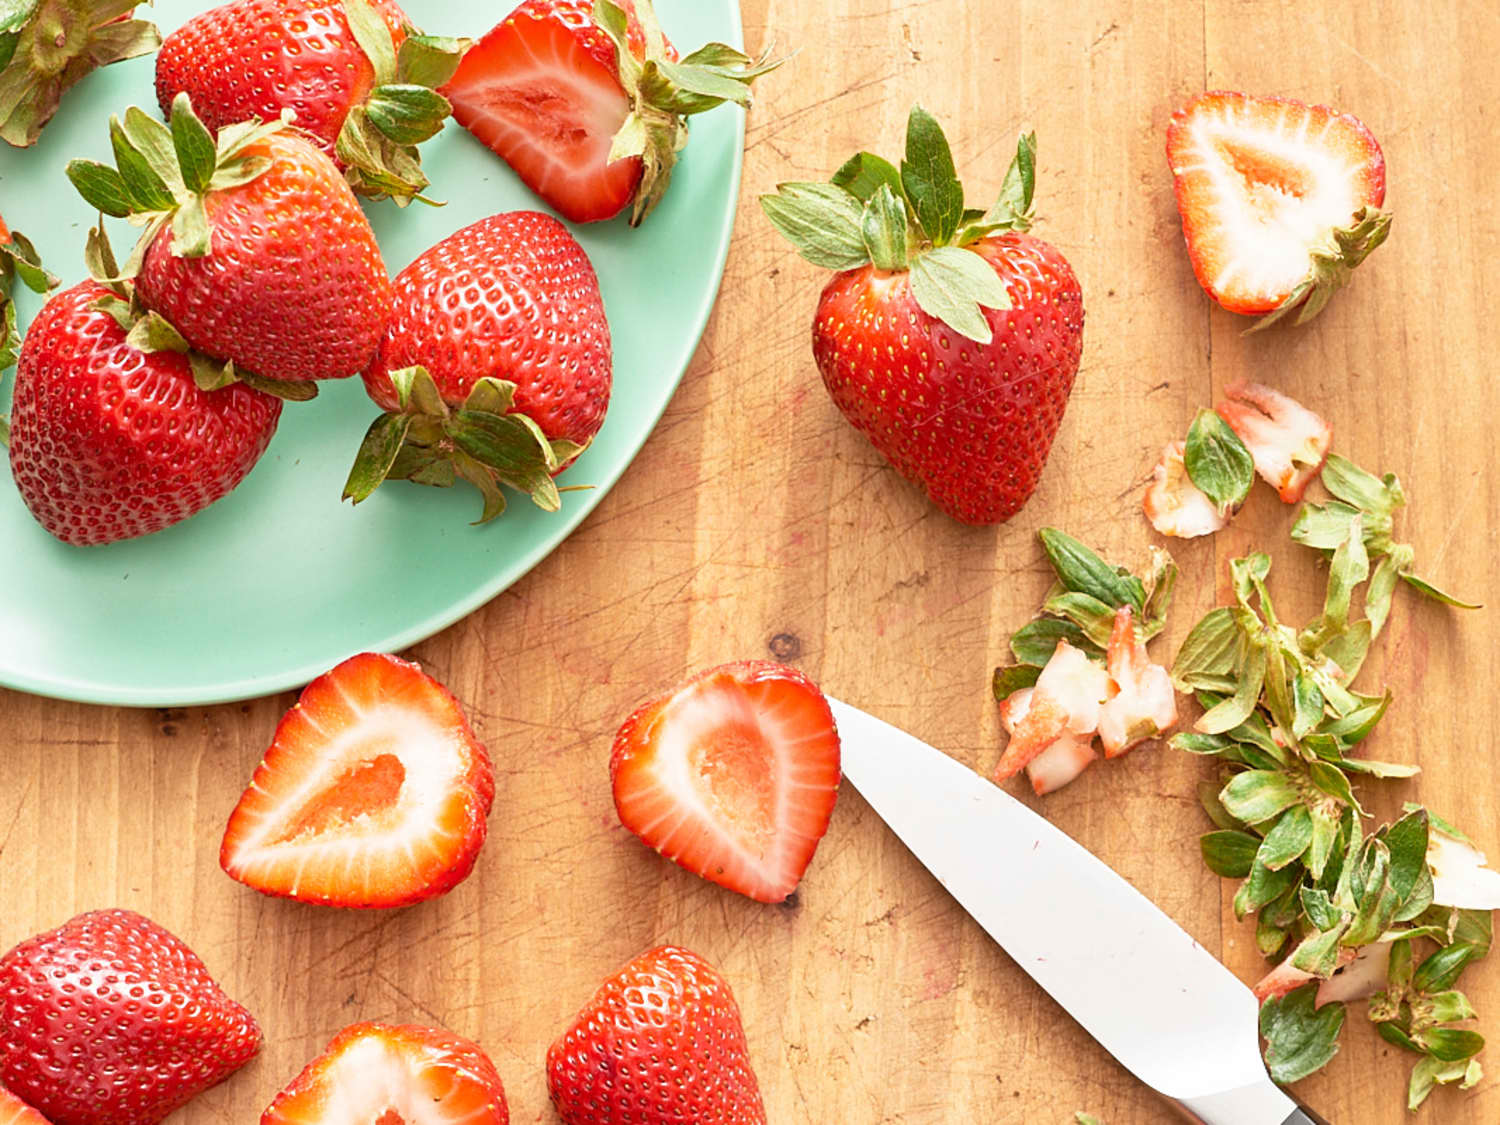 The Best Way to Store Strawberries for Weeks of Freshness - Brightly